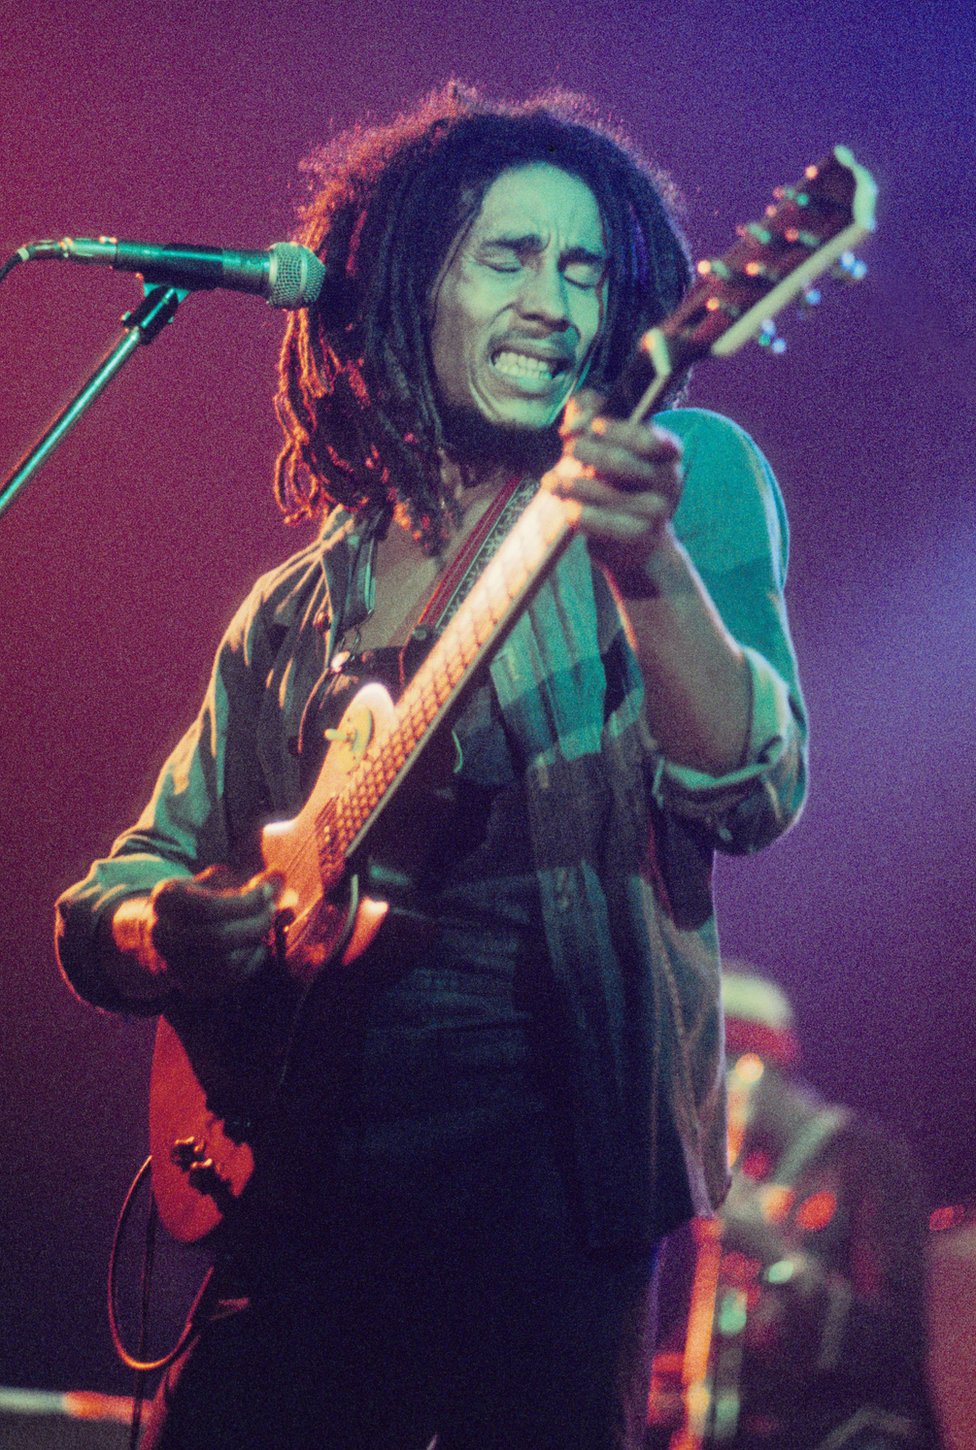 Bob Marley performs on stage in the Netherlands